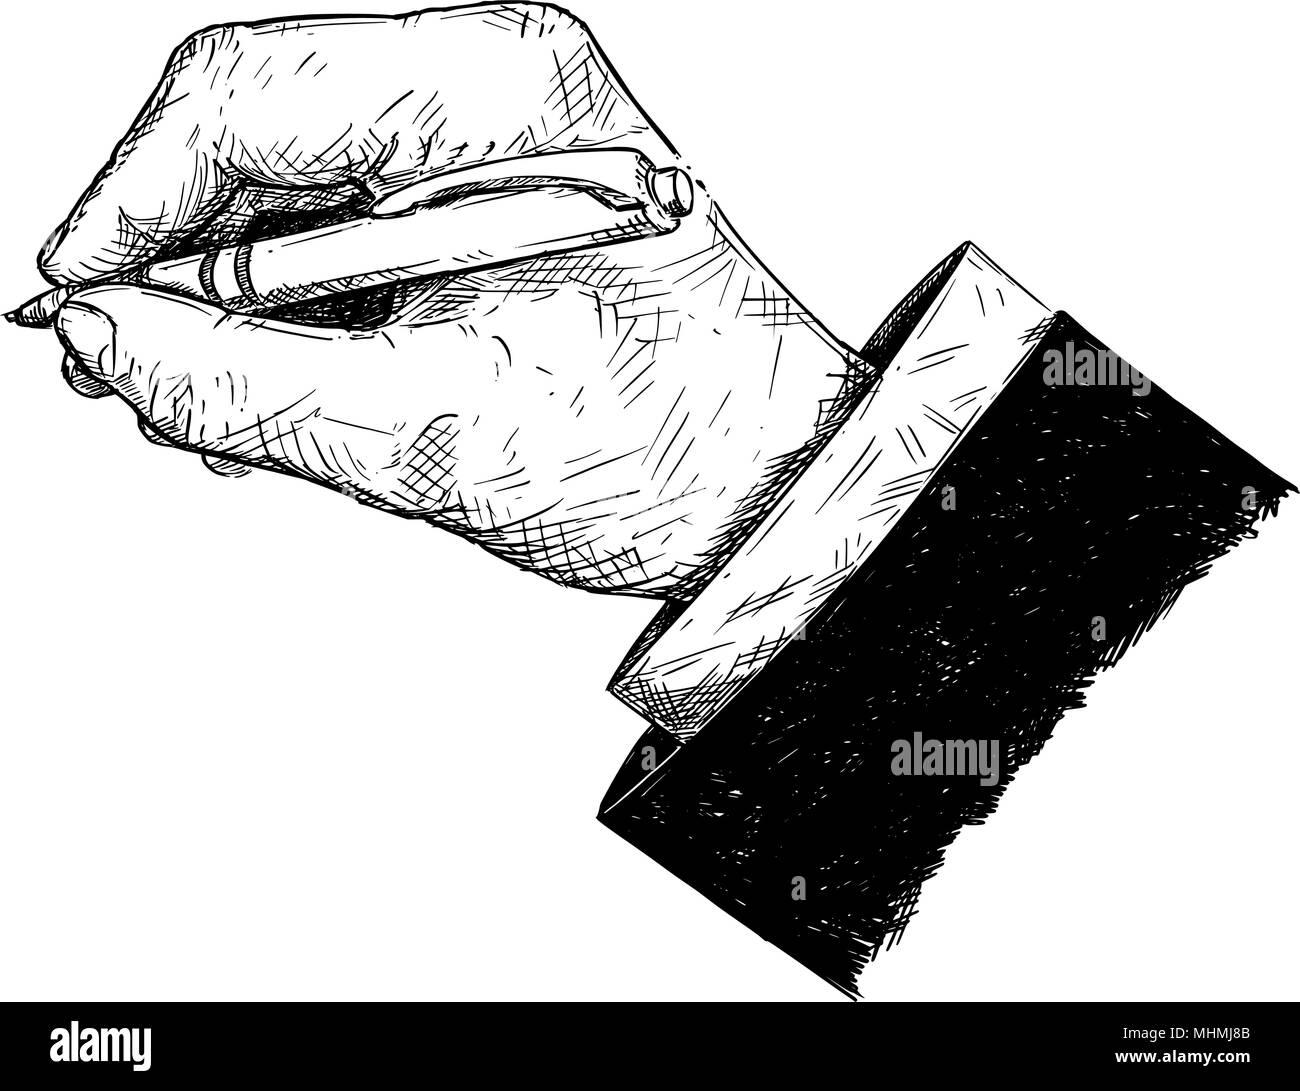 Vector Artistic Illustration or Drawing of Businessman Hand in Suit Writing With Ballpoint Pen Stock Vector